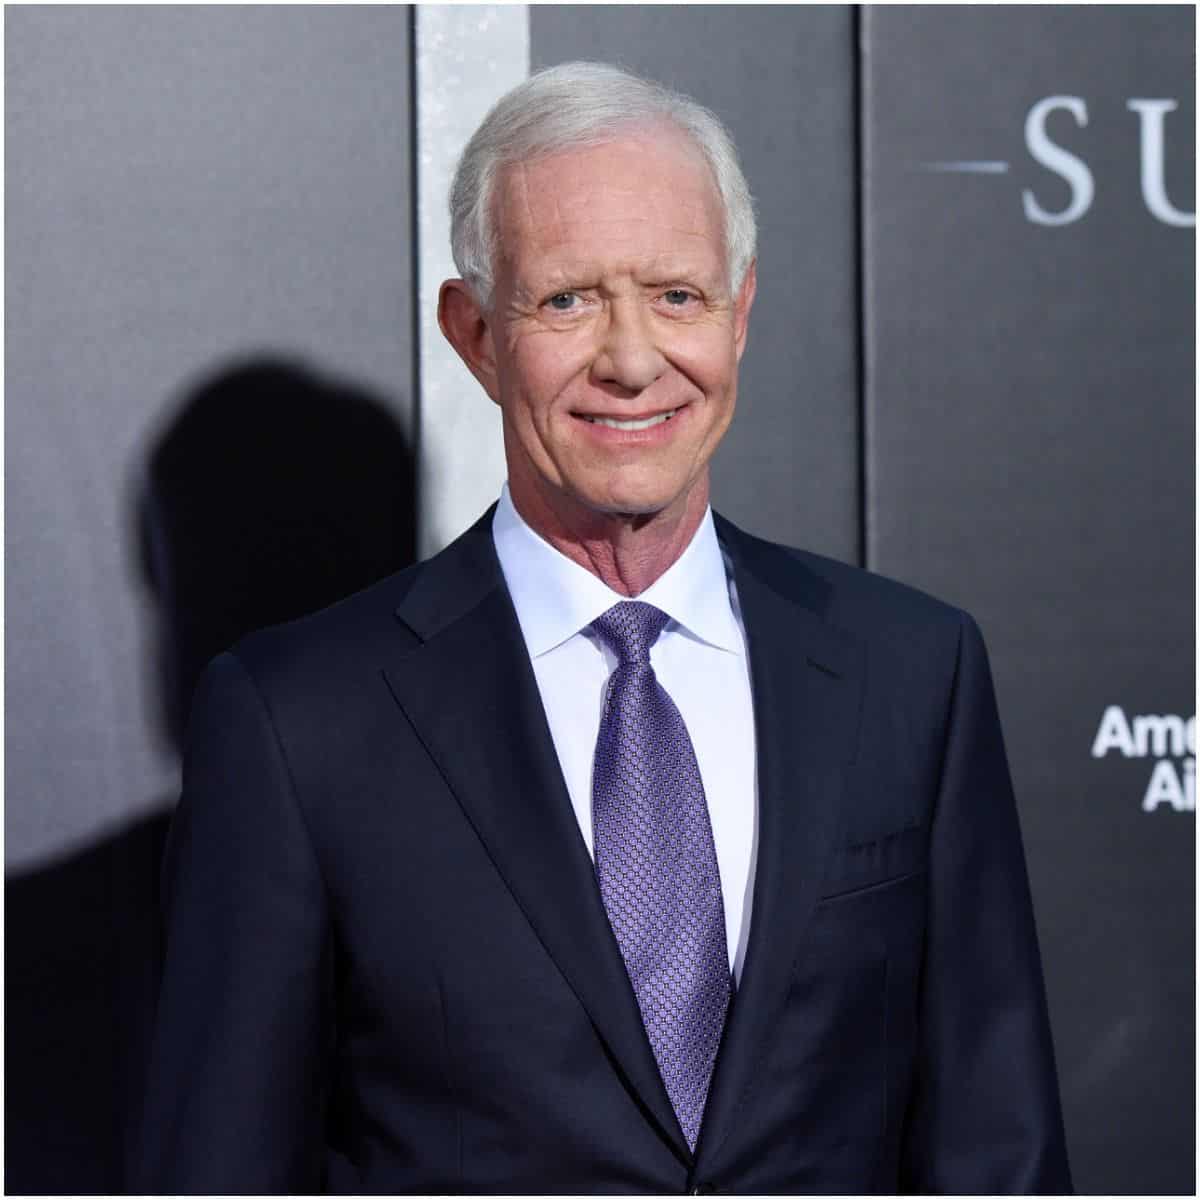 Sully Sullenberger Net Worth